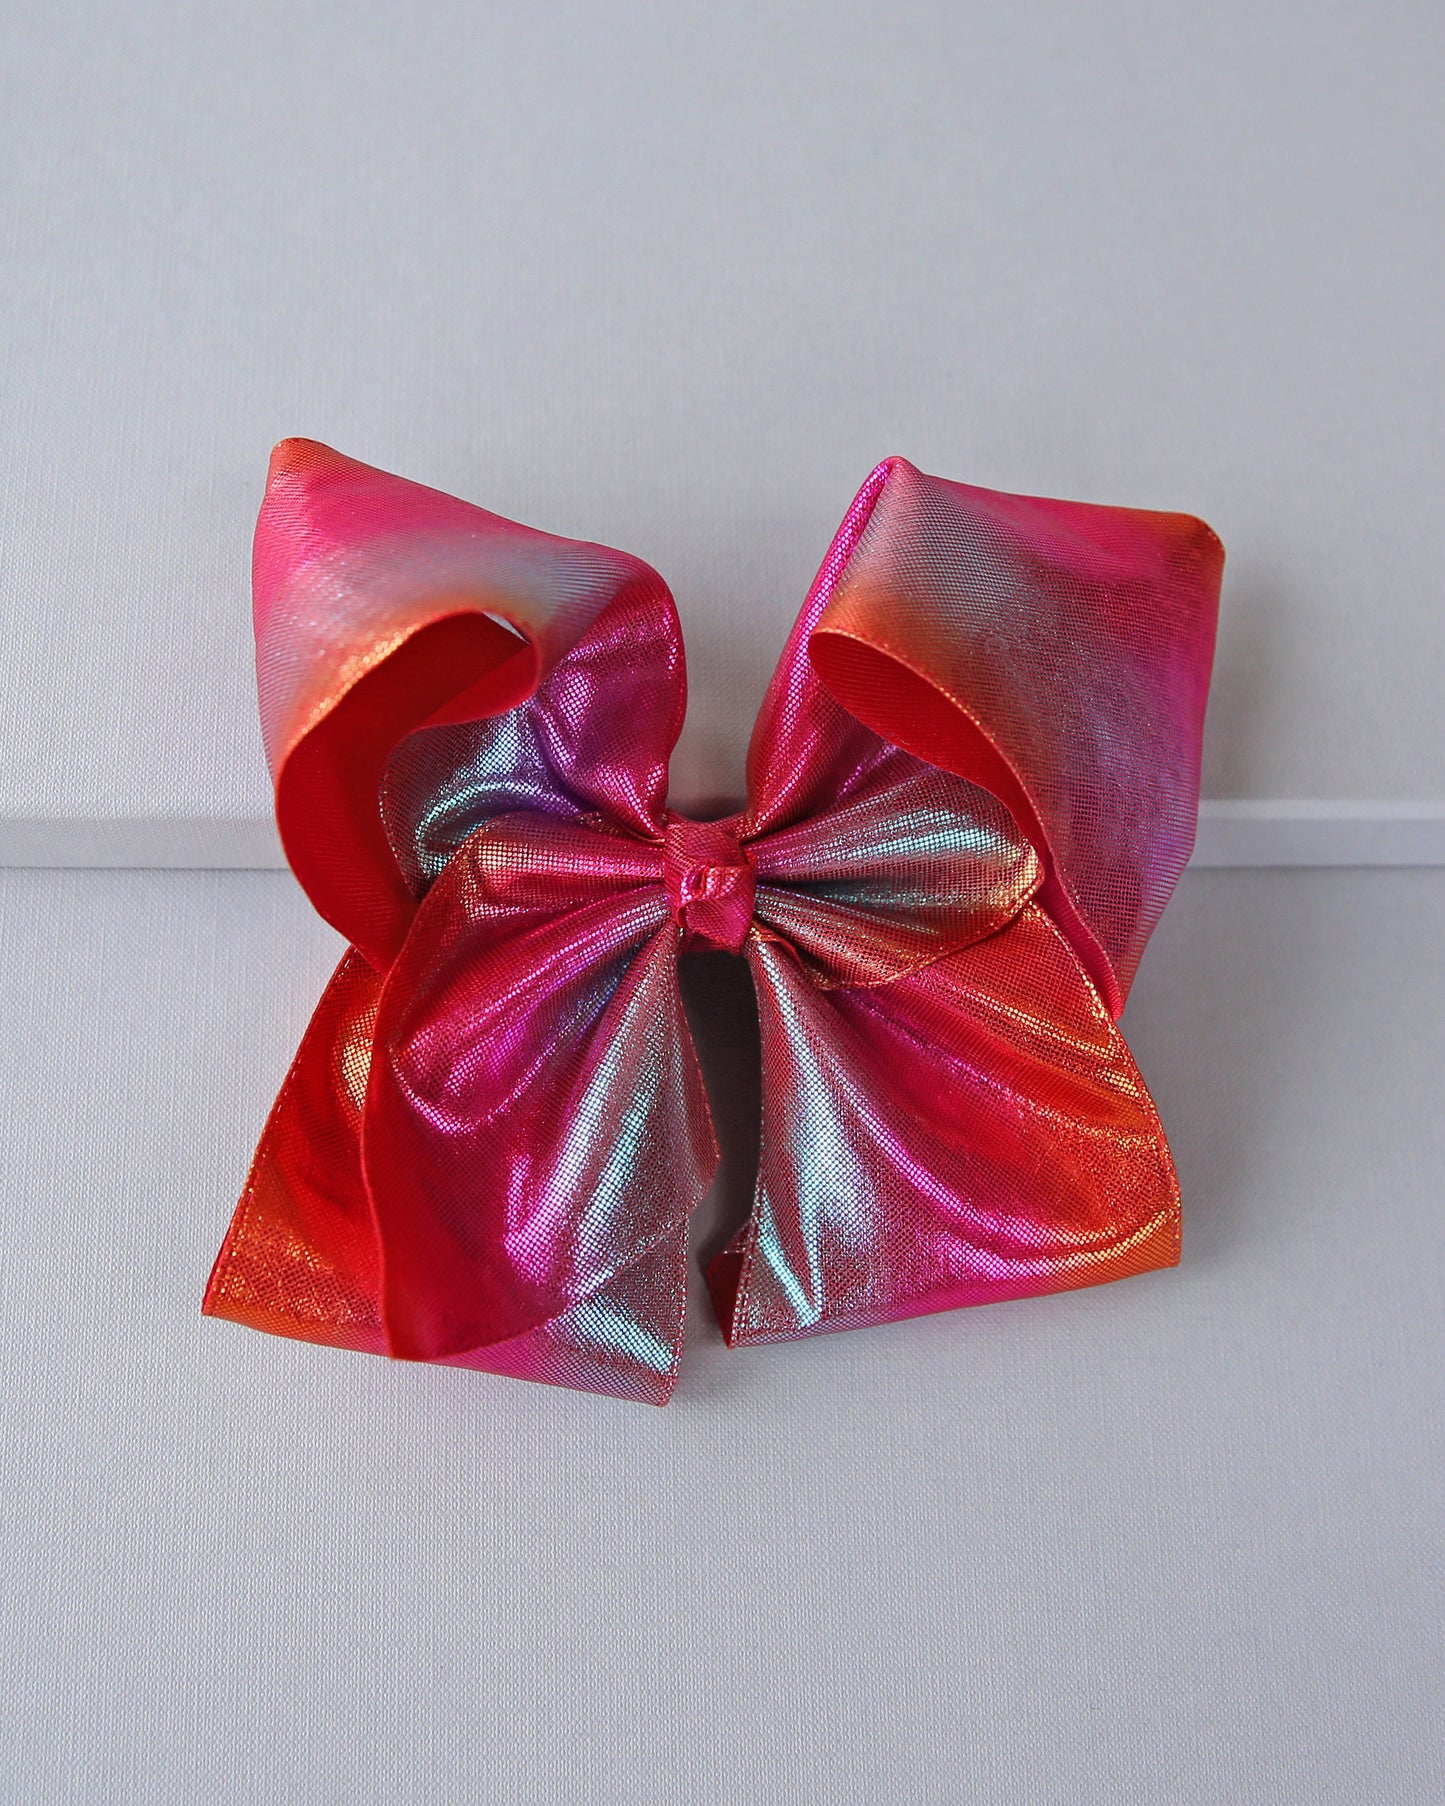 Large Metallic Red Bow Clip - Metallic Bow Clip -  Large Red Bow - Rainbow Red Bow - Oversized Cheer Bow